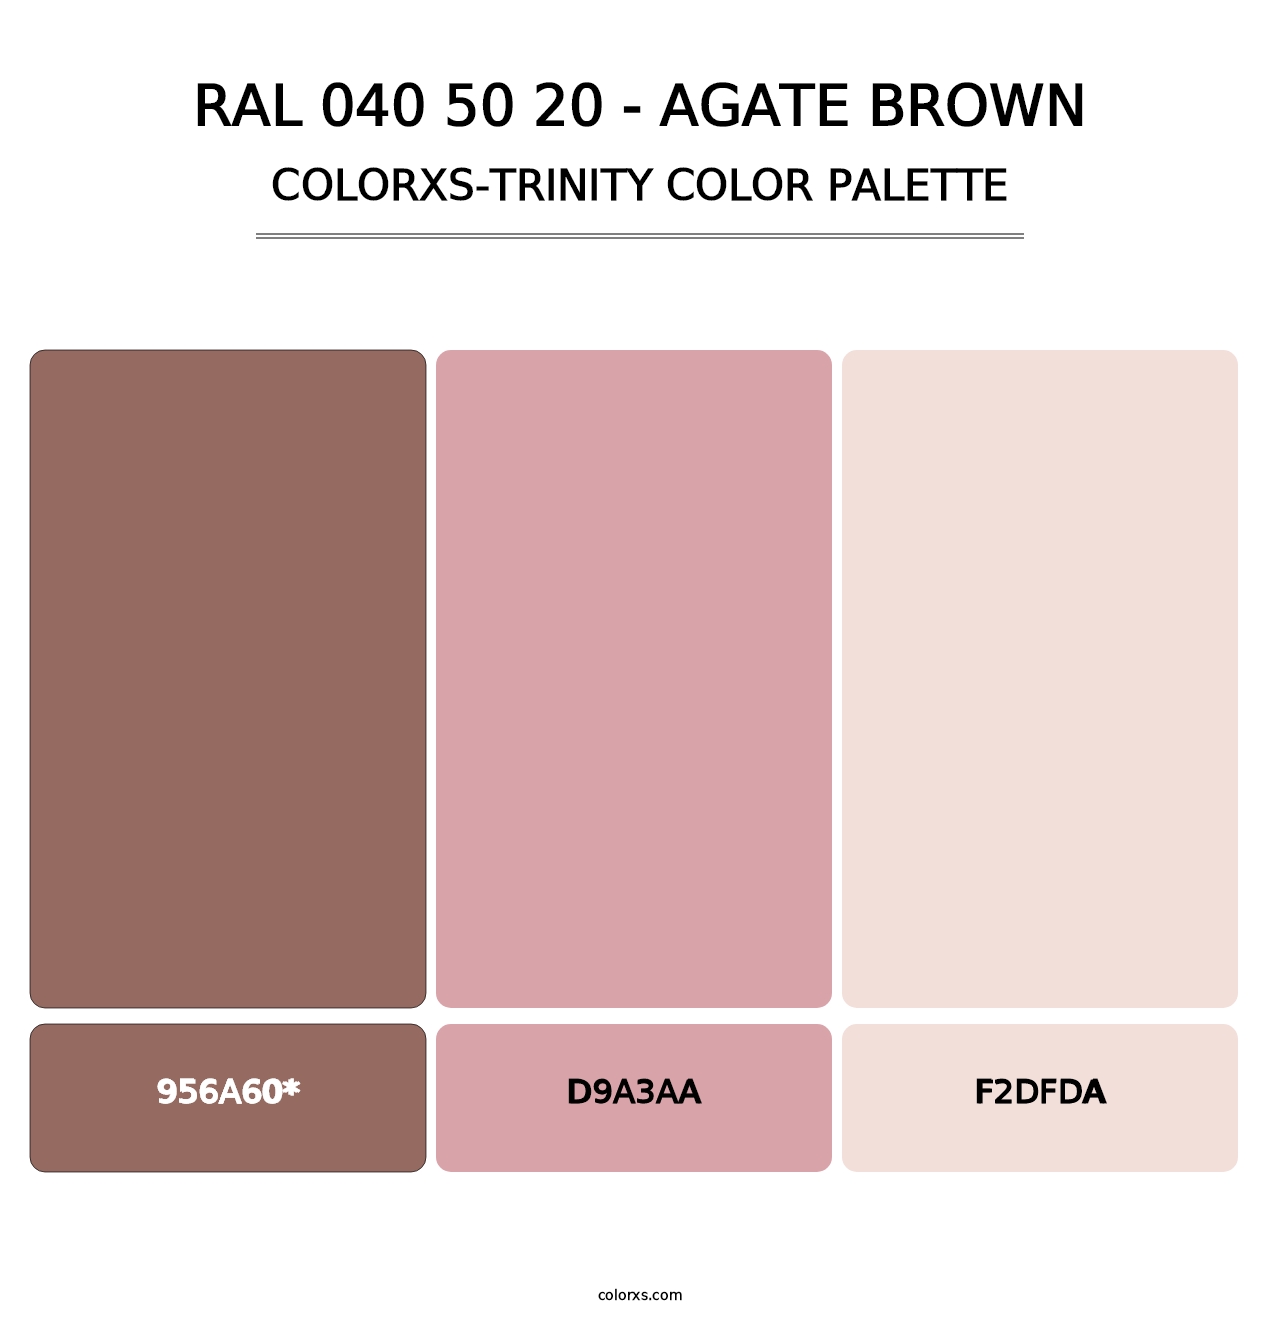 RAL 040 50 20 - Agate Brown - Colorxs Trinity Palette